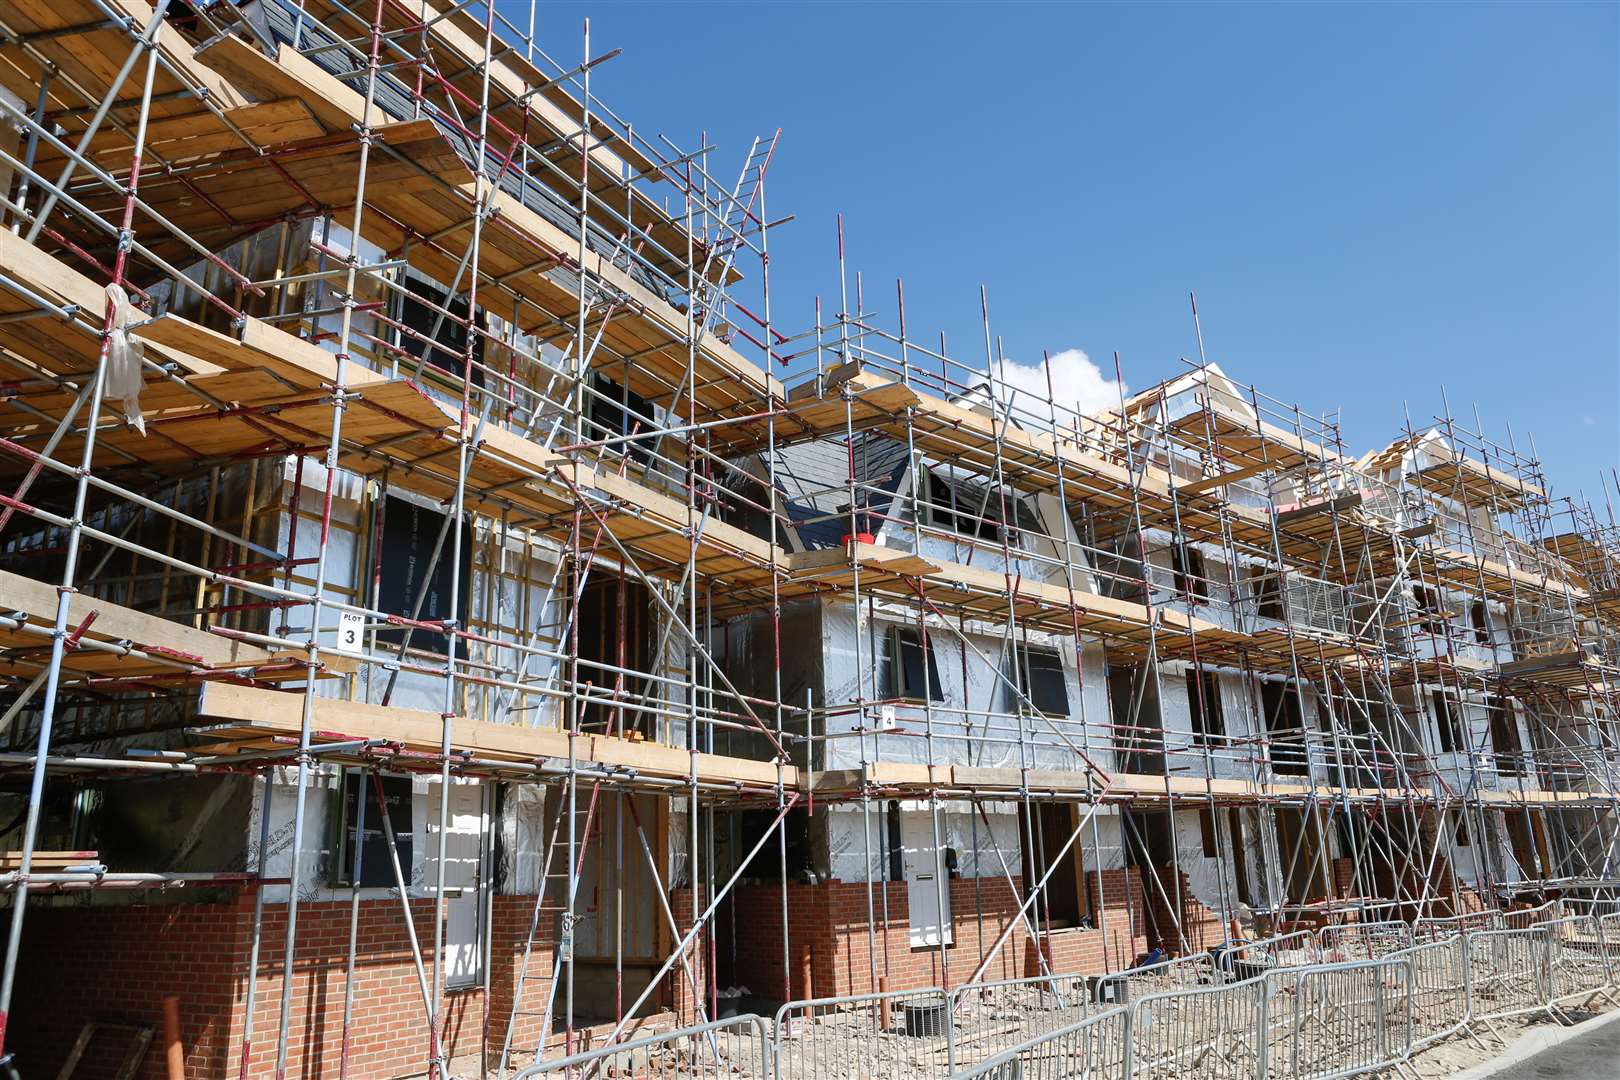 Build-to-rent schemes are popular in Europe and the US and is beginning in the UK